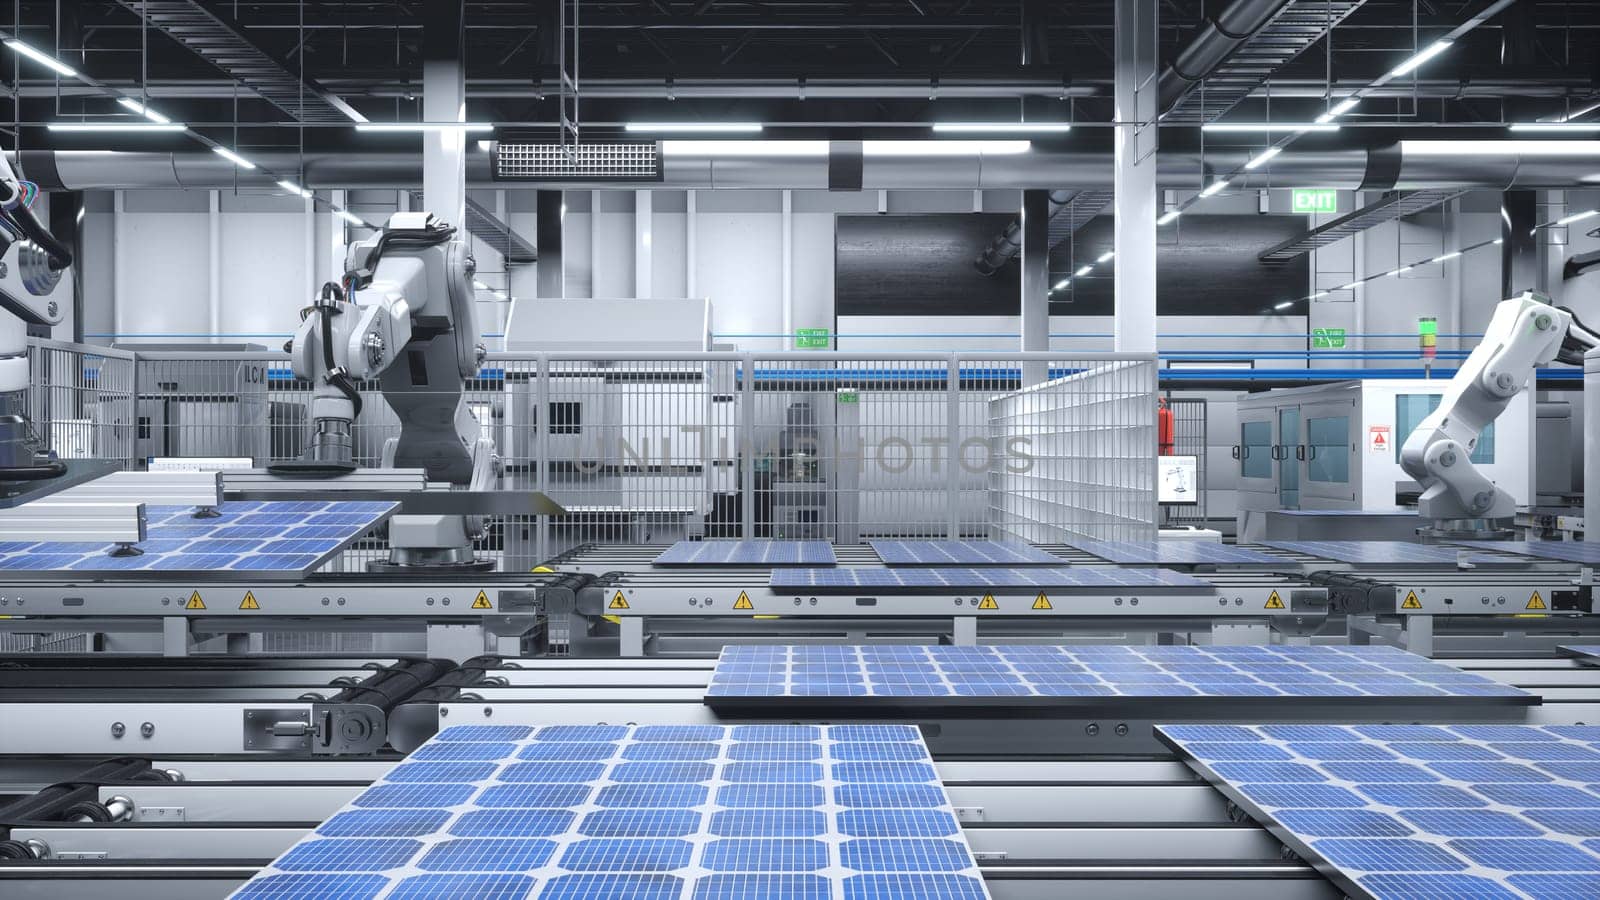 Busy solar panel factory with robot arms placing photovoltaic modules on conveyor belts, 3D illustration. Cutting edge manufacturing warehouse producing solar cells for renewable energy industry